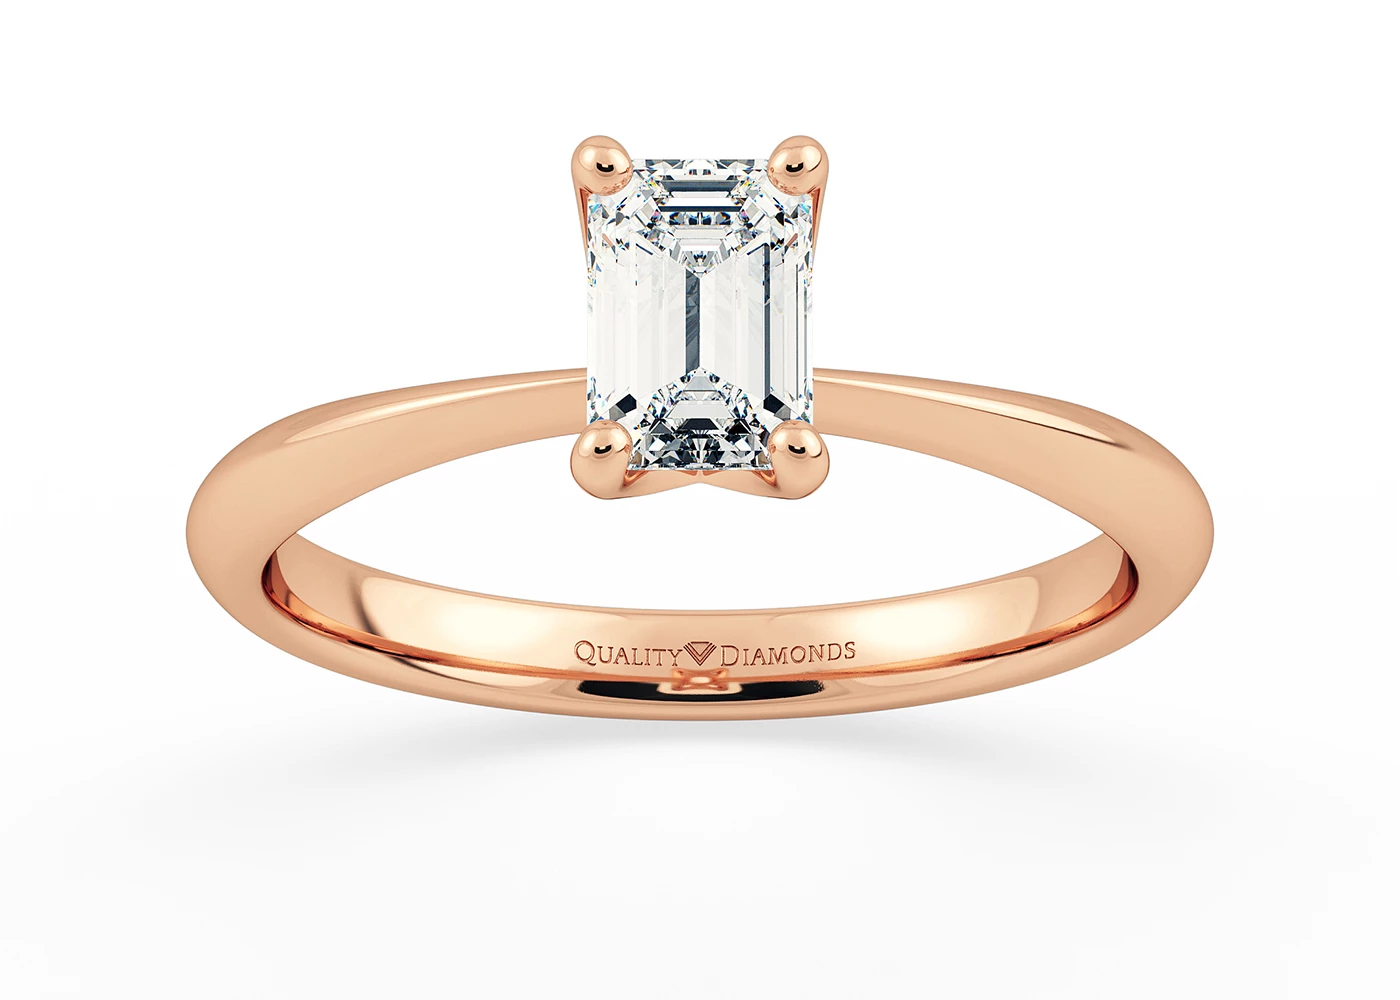 Two Carat Emerald Solitaire Diamond Engagement Ring in 18K Rose Gold